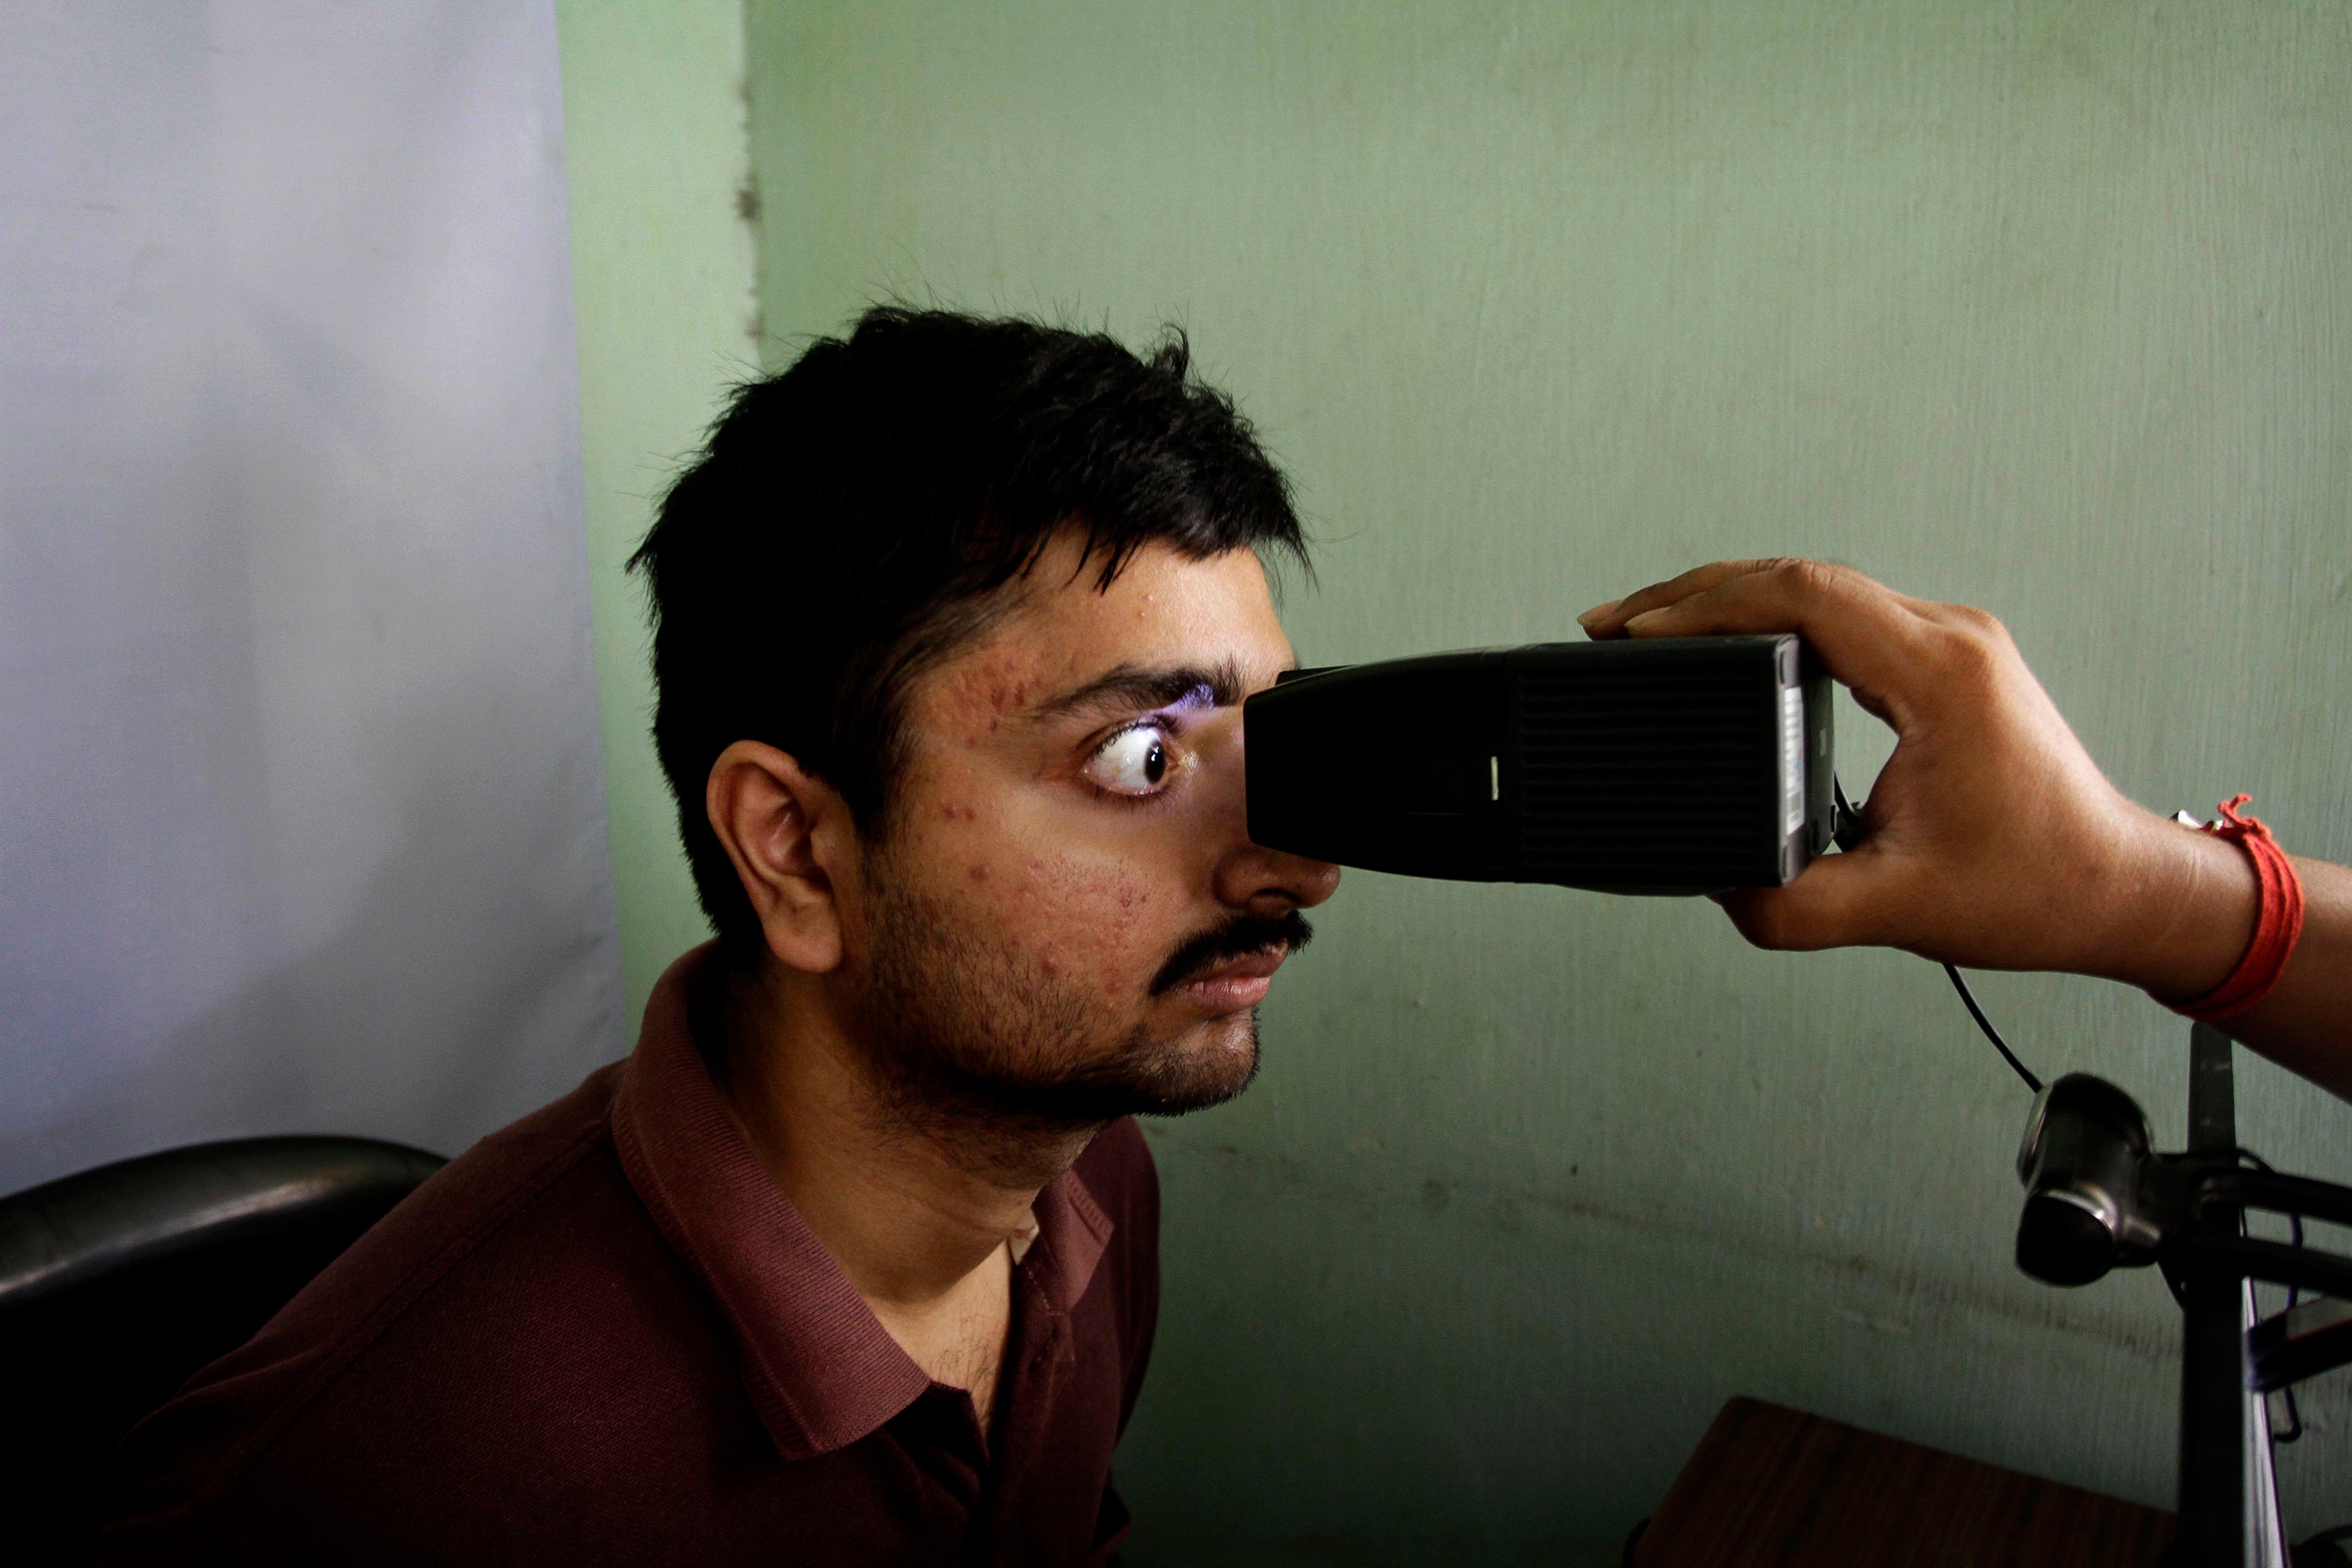 An Indian man gets his retina scanned to register for Aadhar, India’s unique identification project, in Calcutta. The agency responsible for India’s national identification database is among the organisations to have been hacked